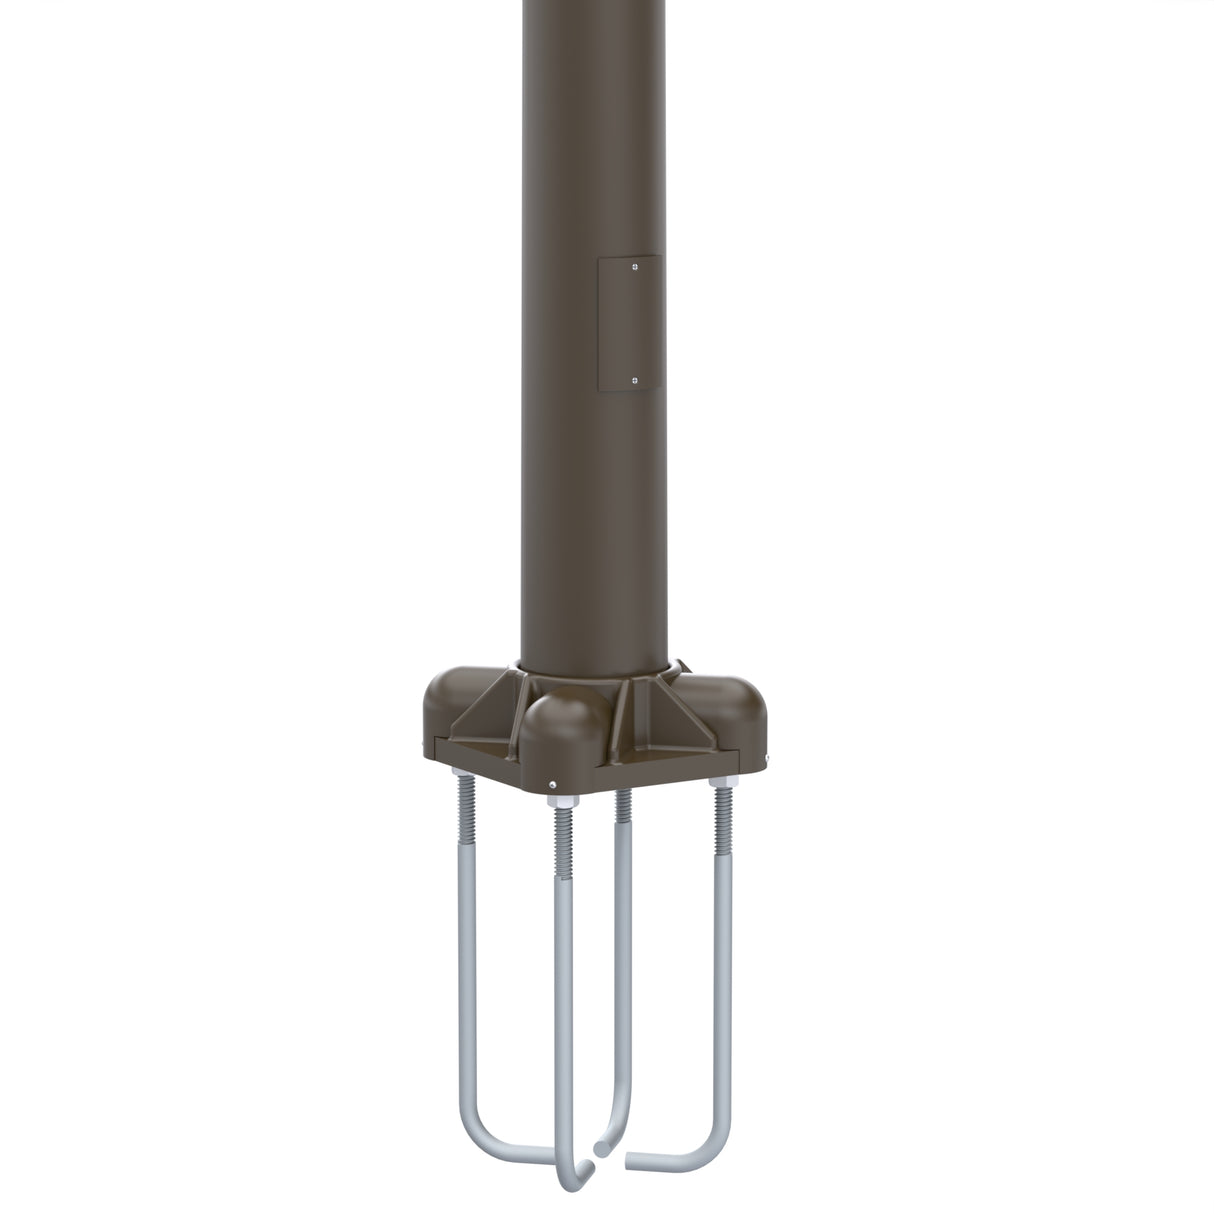 25' Tall x 6.0" Base OD x 4.0" Top OD x 0.188" Thick, Round Tapered Aluminum, Anchor Base Light Pole